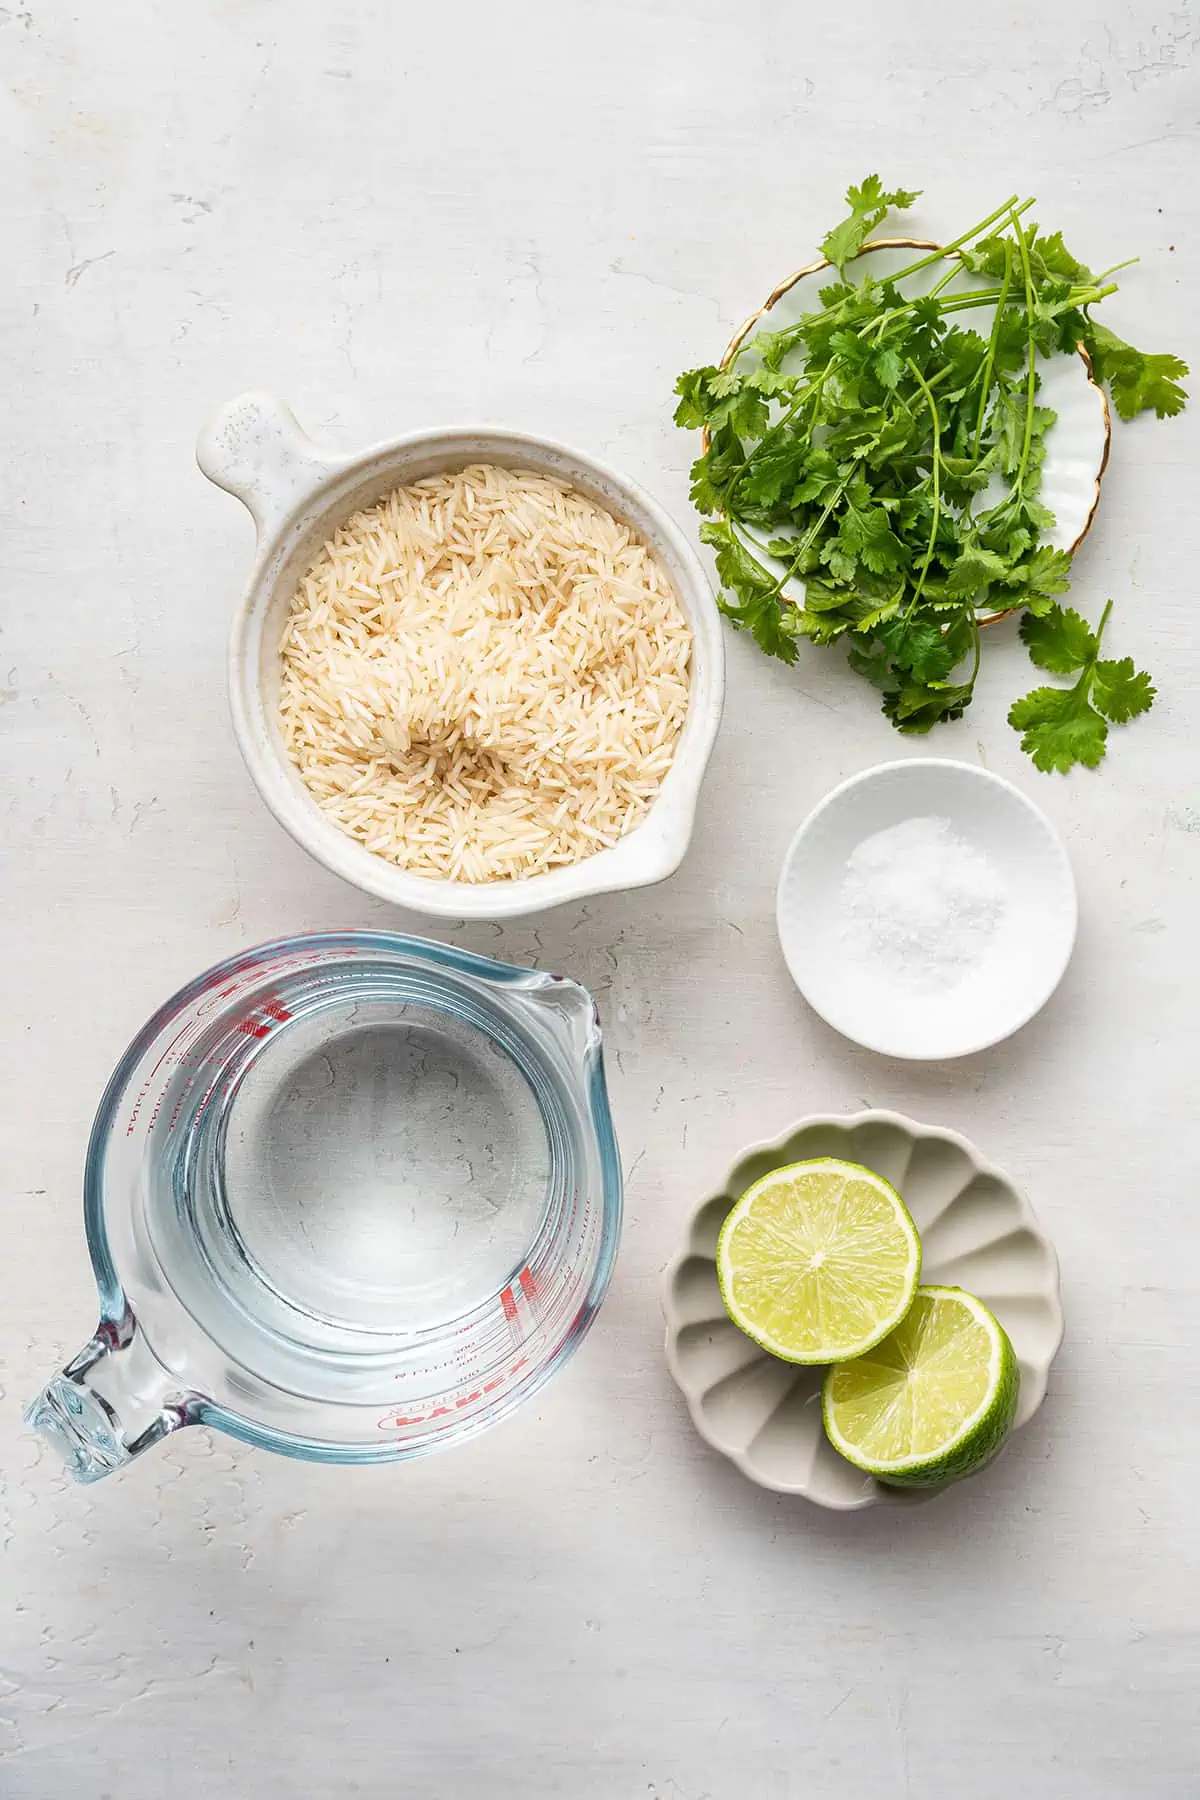 Overhead view of the ingredients for cilantro lime rice: a bowl of raw rice, a bunch of cilantro, a bowl of salt, a bowl with two lime halves, and a pyrex of water.